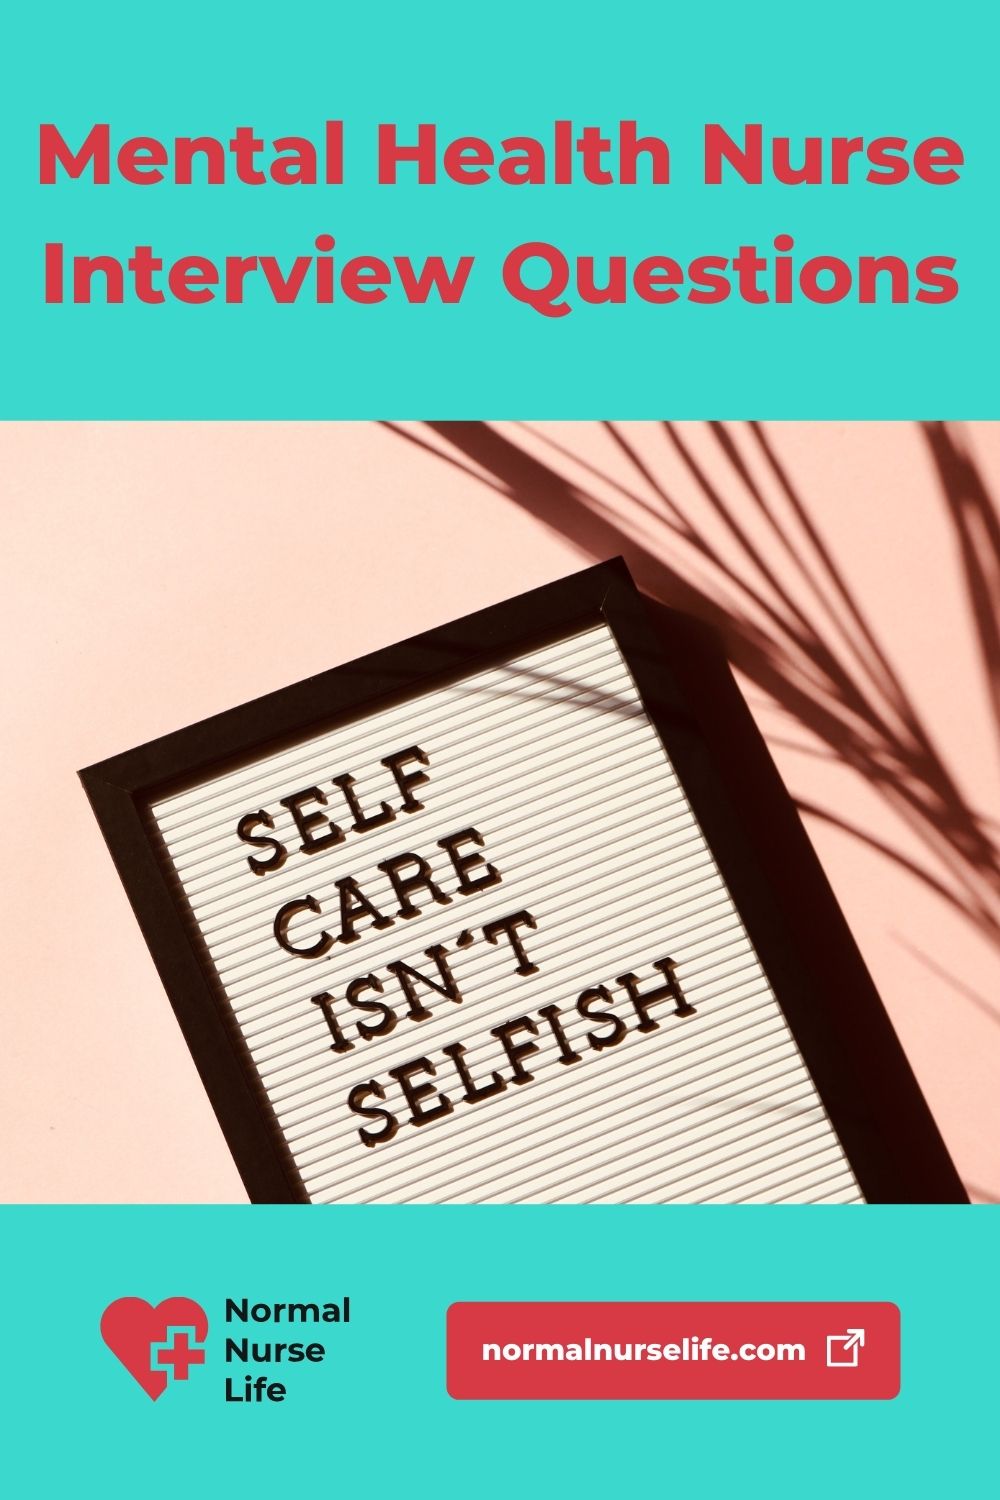 Mental health nurse interview questions and answers